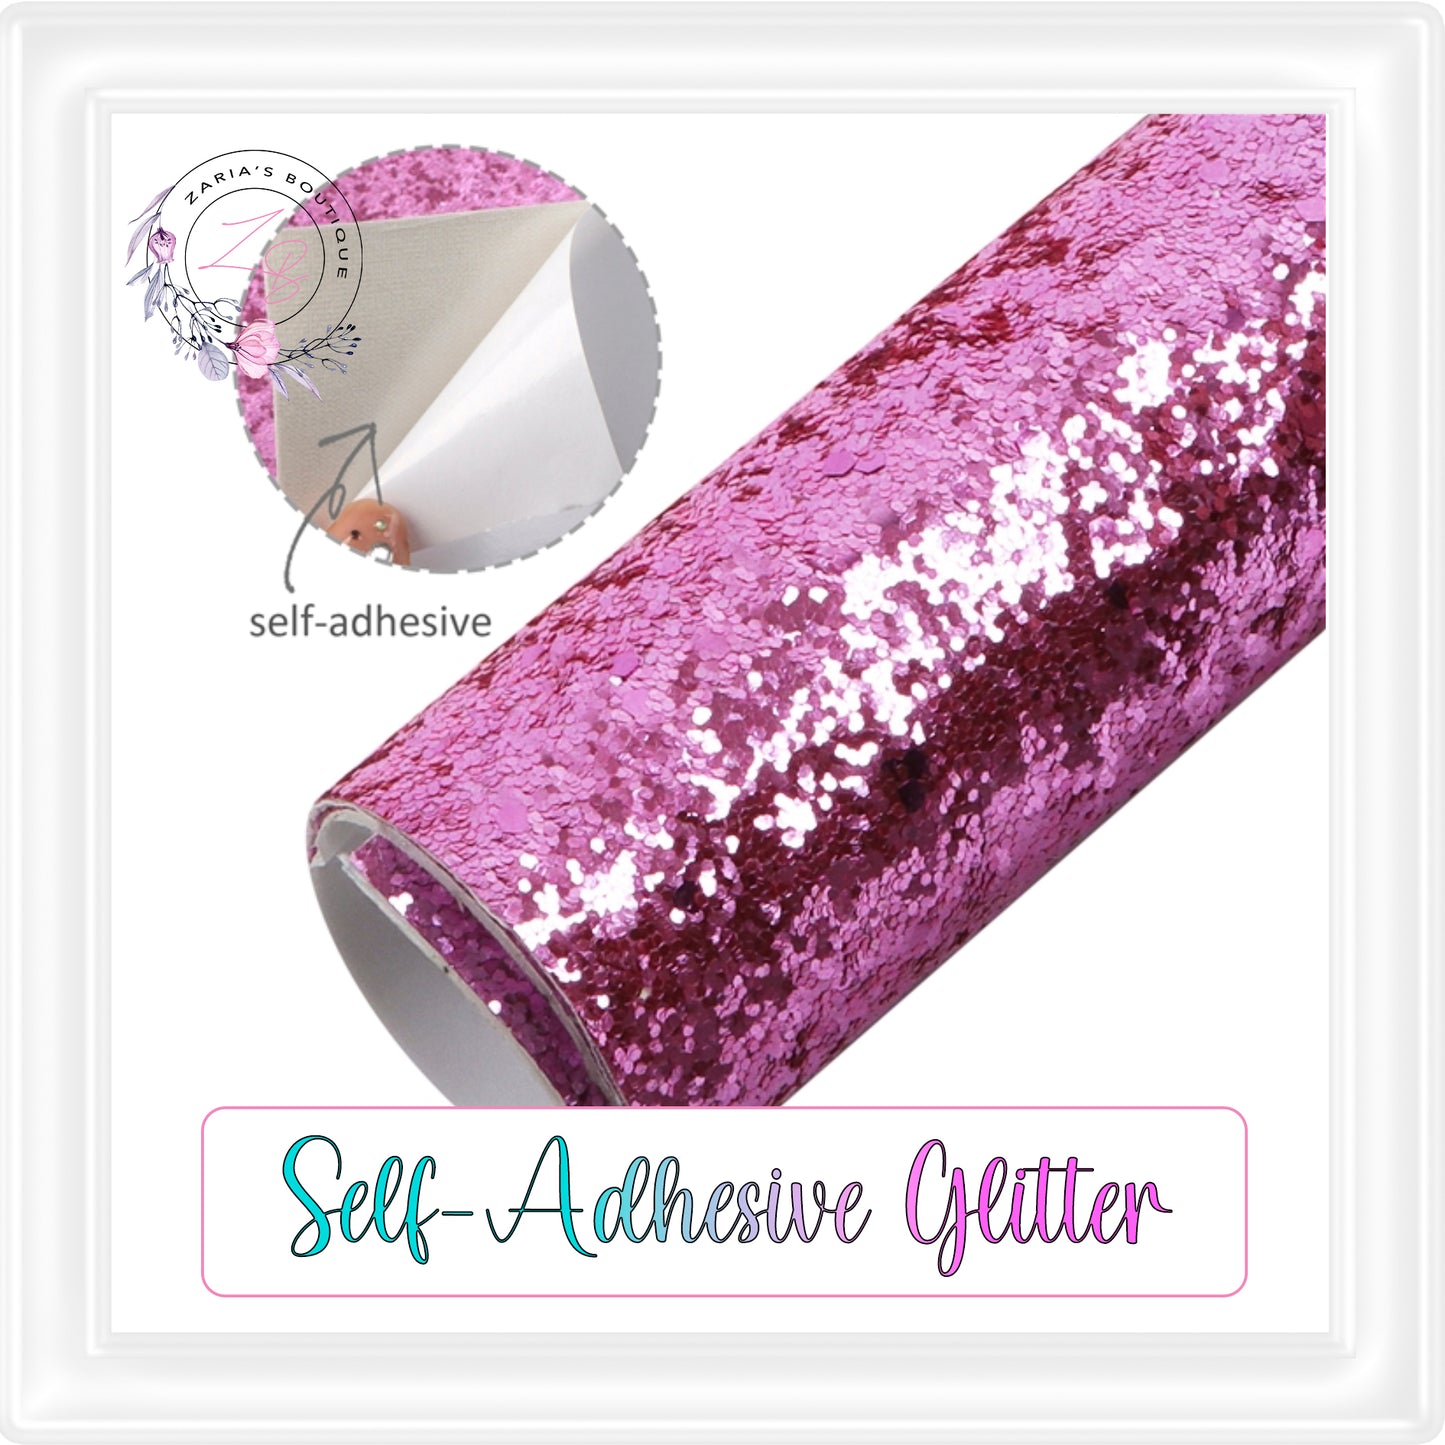 ⋅ Self-Adhesive Backed Medium Glitter ⋅ For Double-Sided Projects ⋅ PINK ⋅